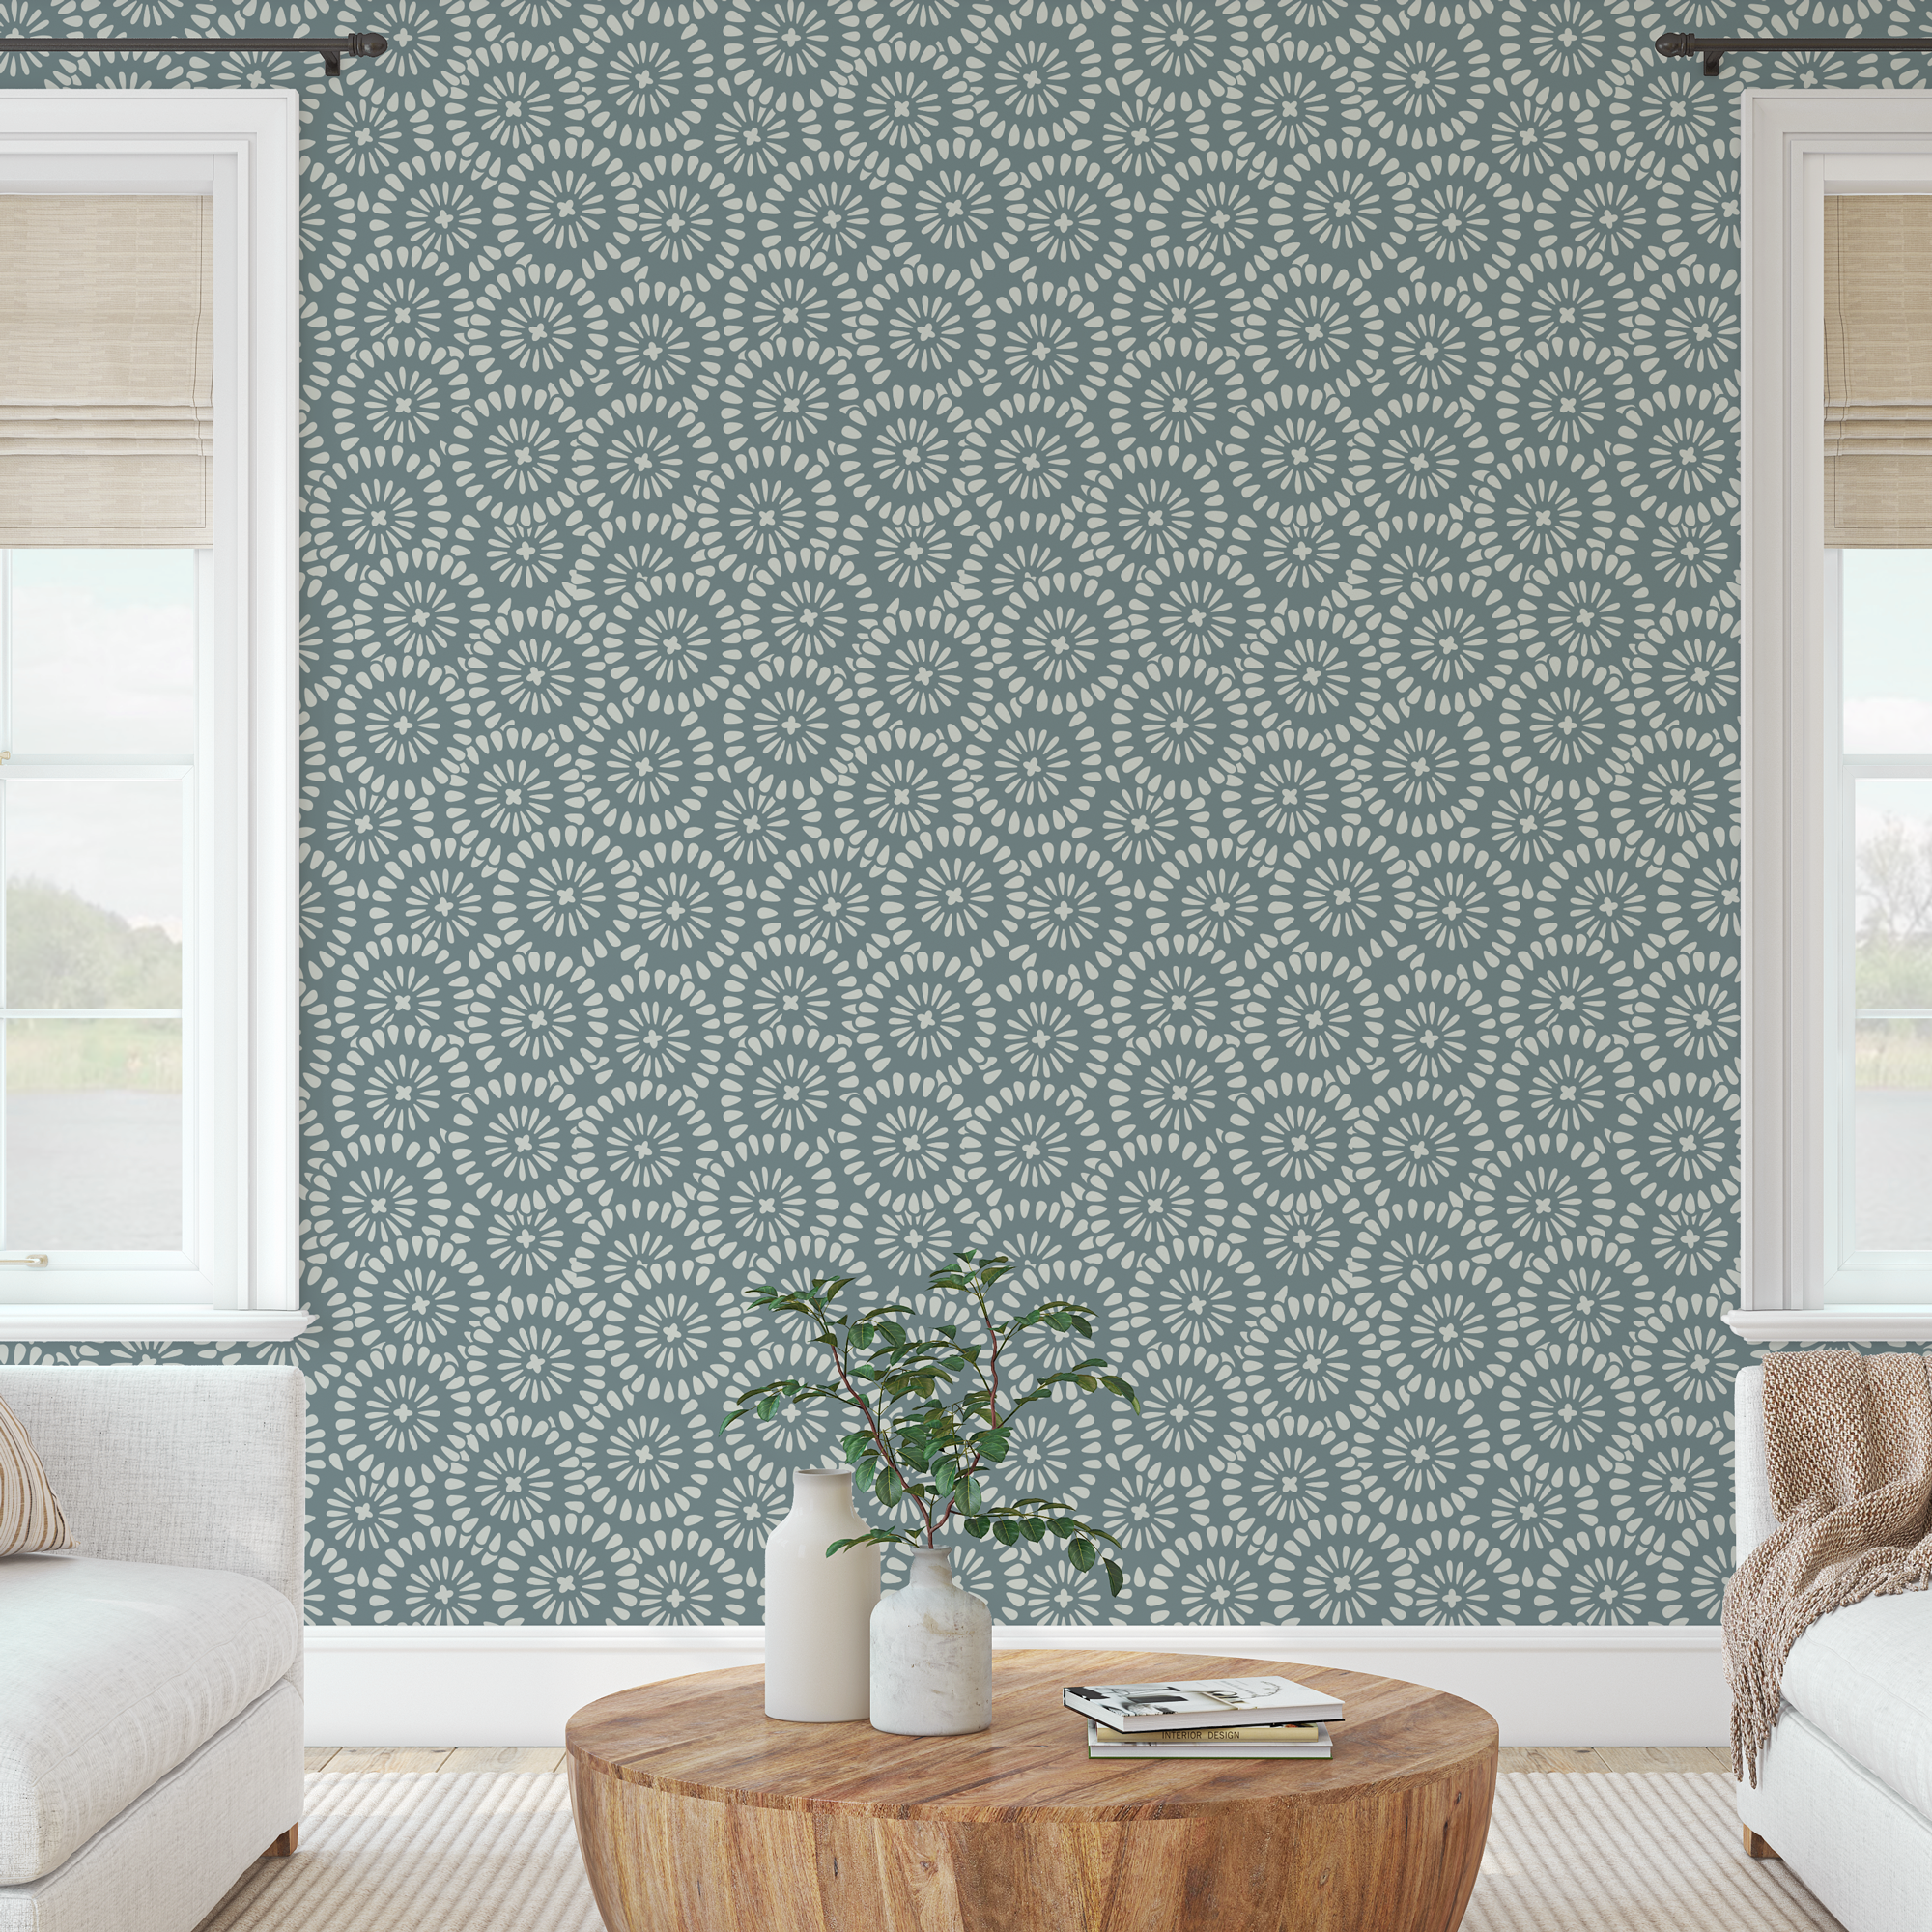 The finished repeat wall pattern in a living room.